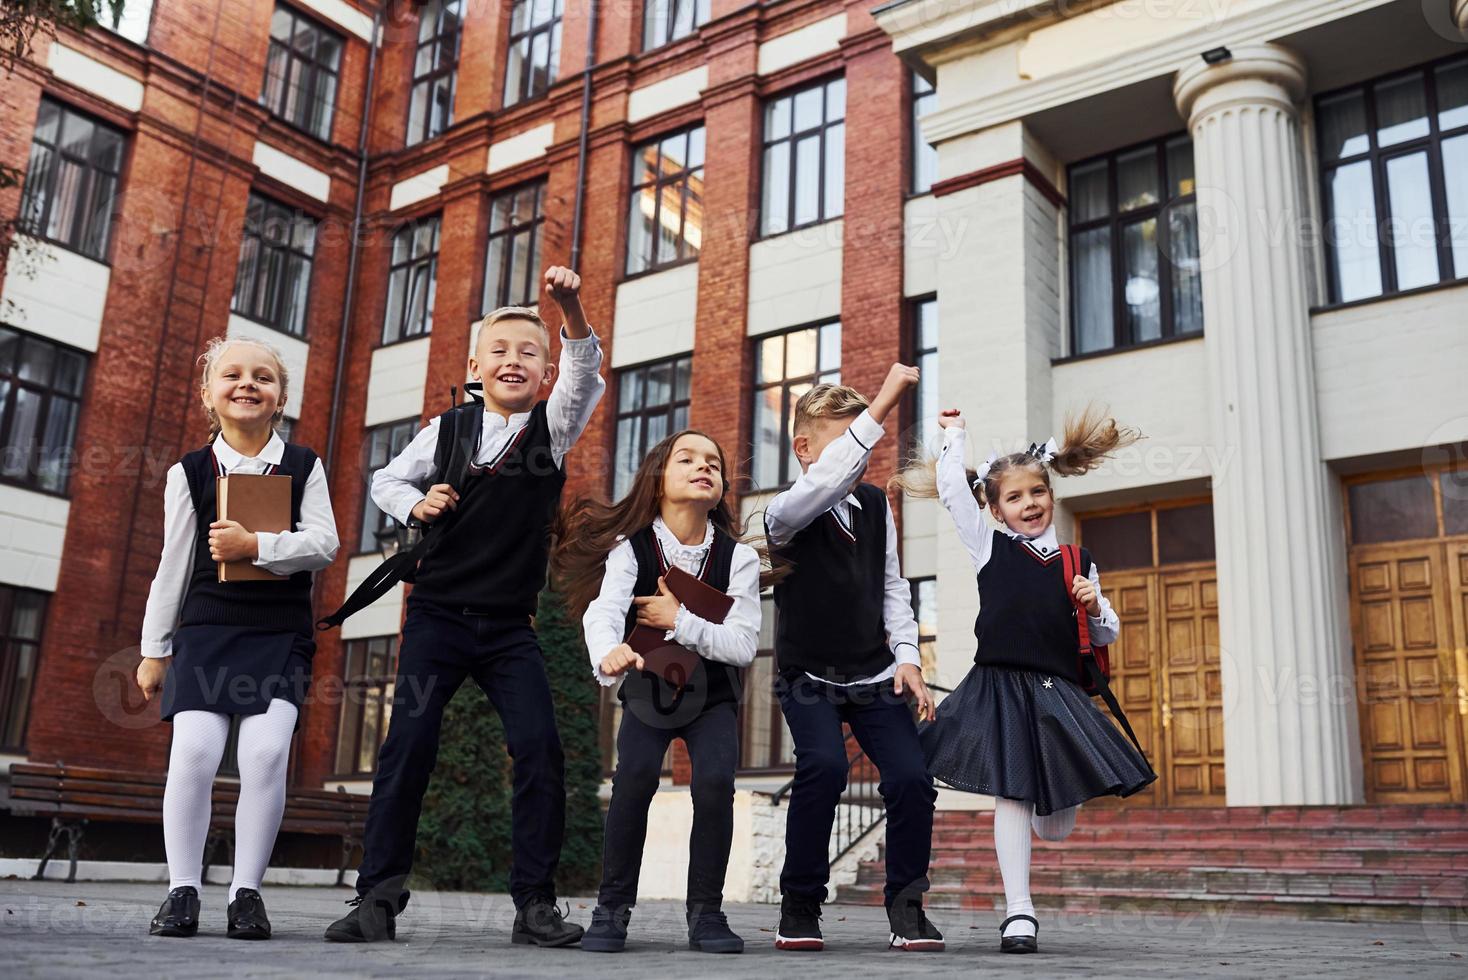 Group of kids in school uniform jumping and having fun outdoors together near education building photo